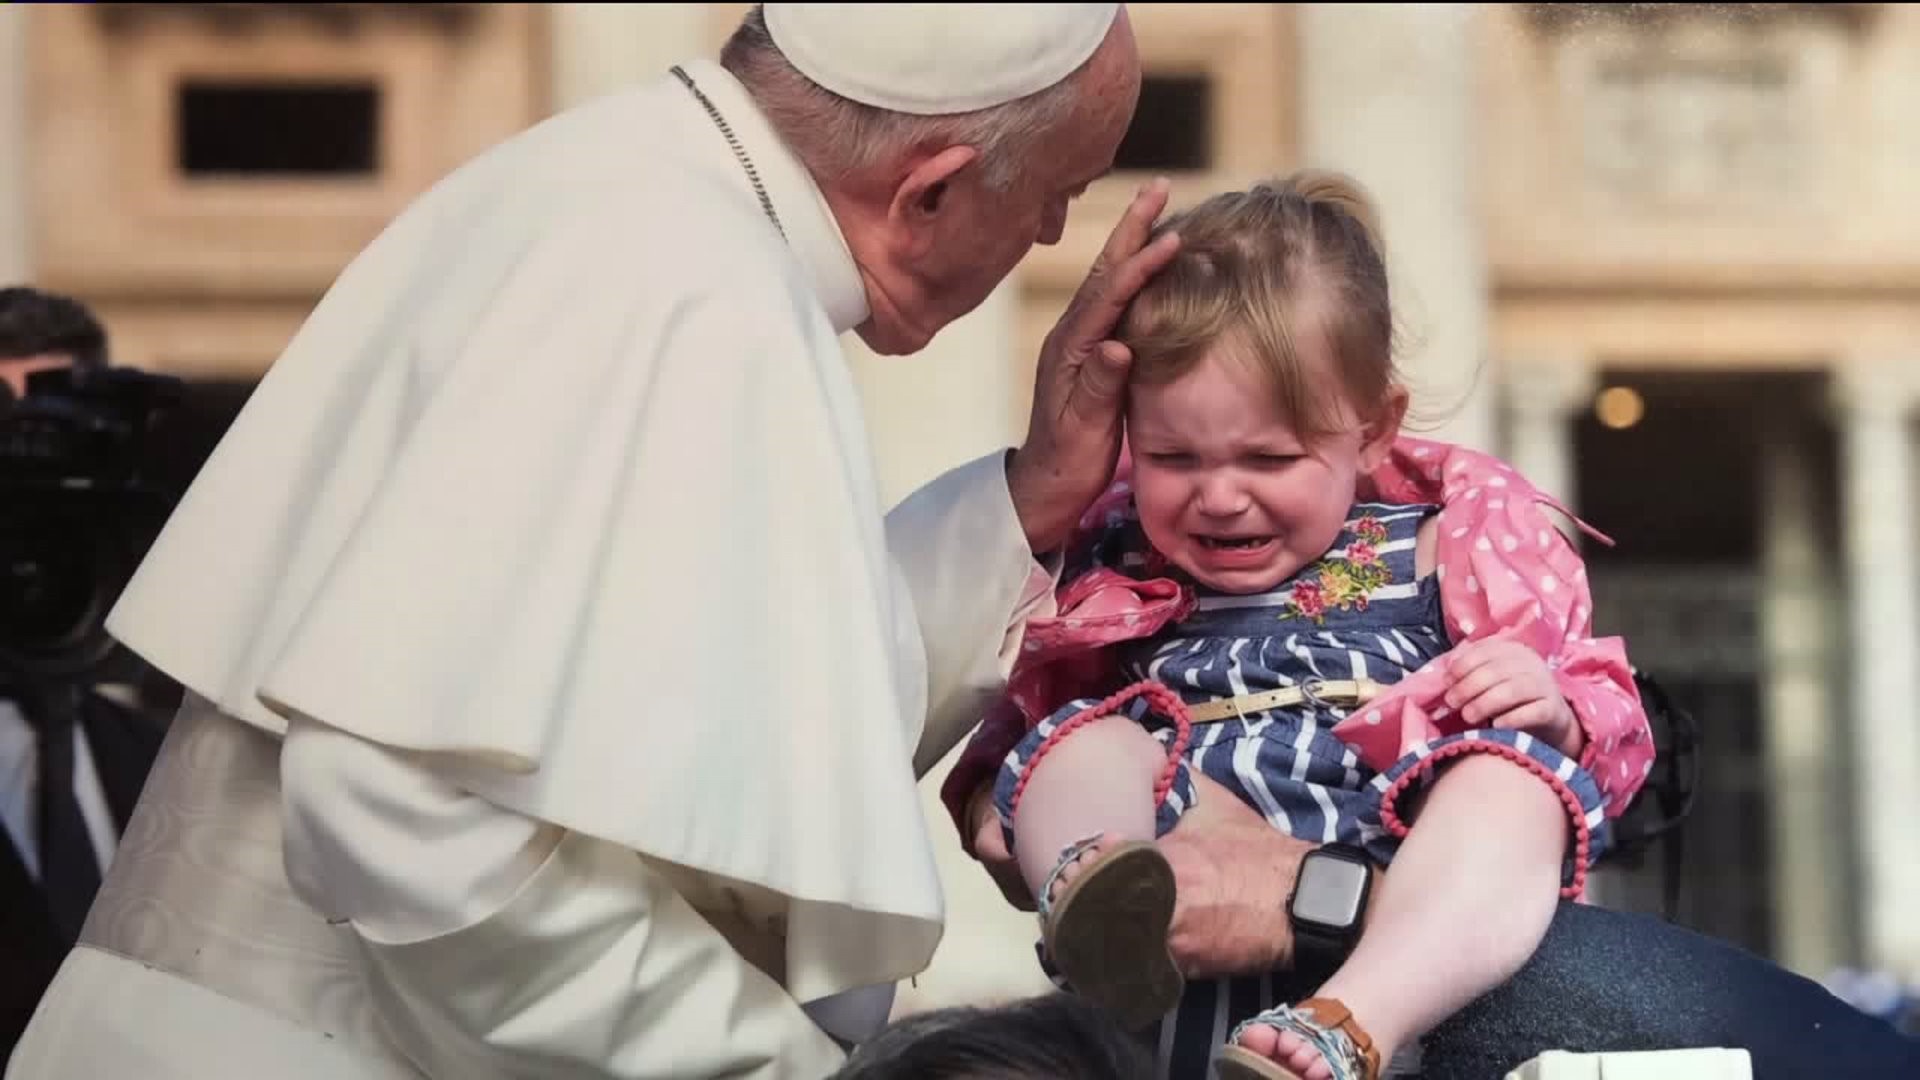 Little Girl from Hunlock Creek Gets Personal Blessing from Pope Francis